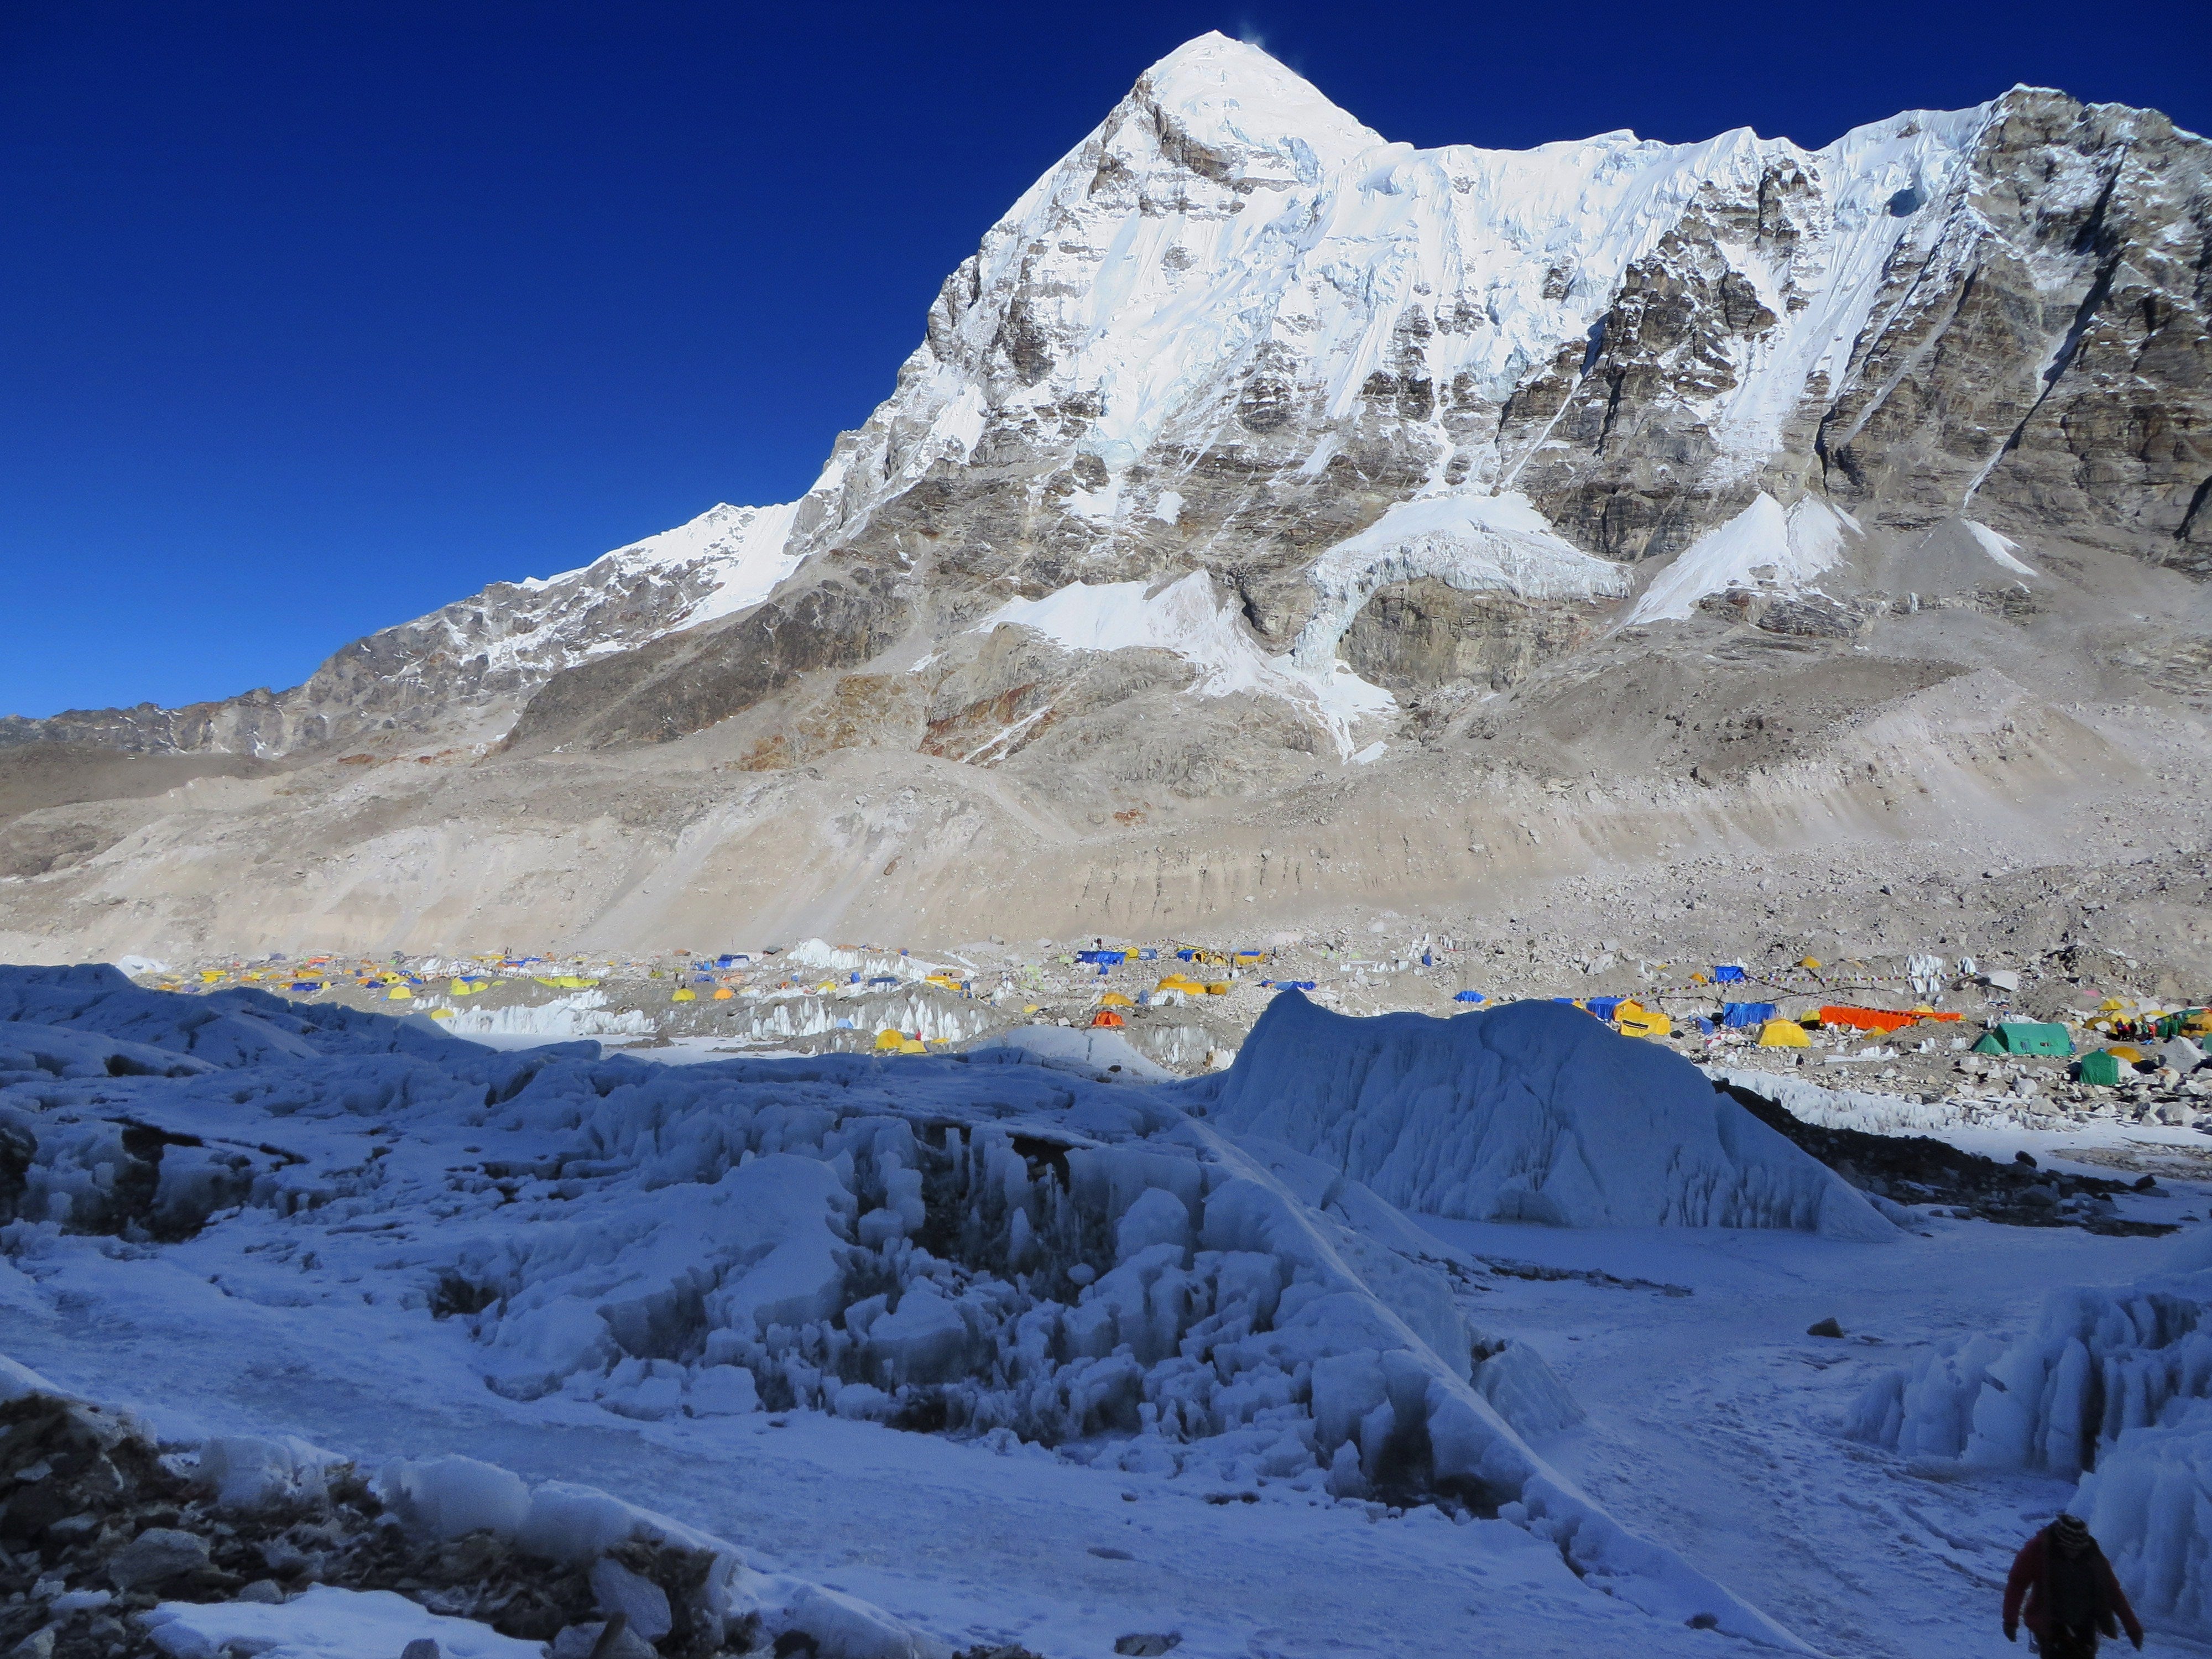 Everest Base Camp is seen from Crampon Point, the entrance into the Khumbu icefall below Mount Everest, following an avalanche that killed sixteen Nepalese sherpas in the Khumbu icefall